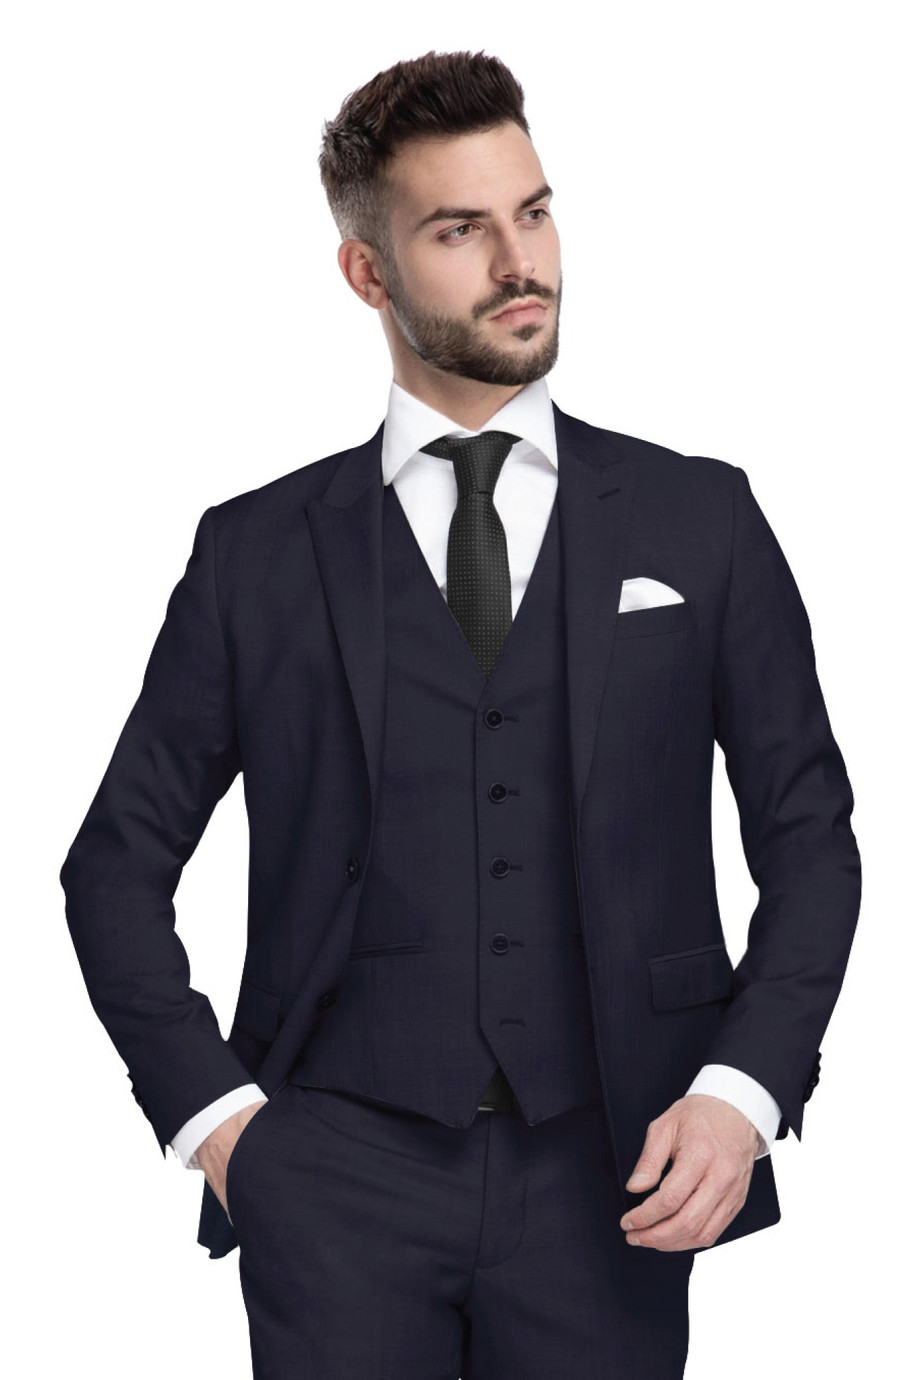 Five Reasons to Purchase Custom Suits on the Internet